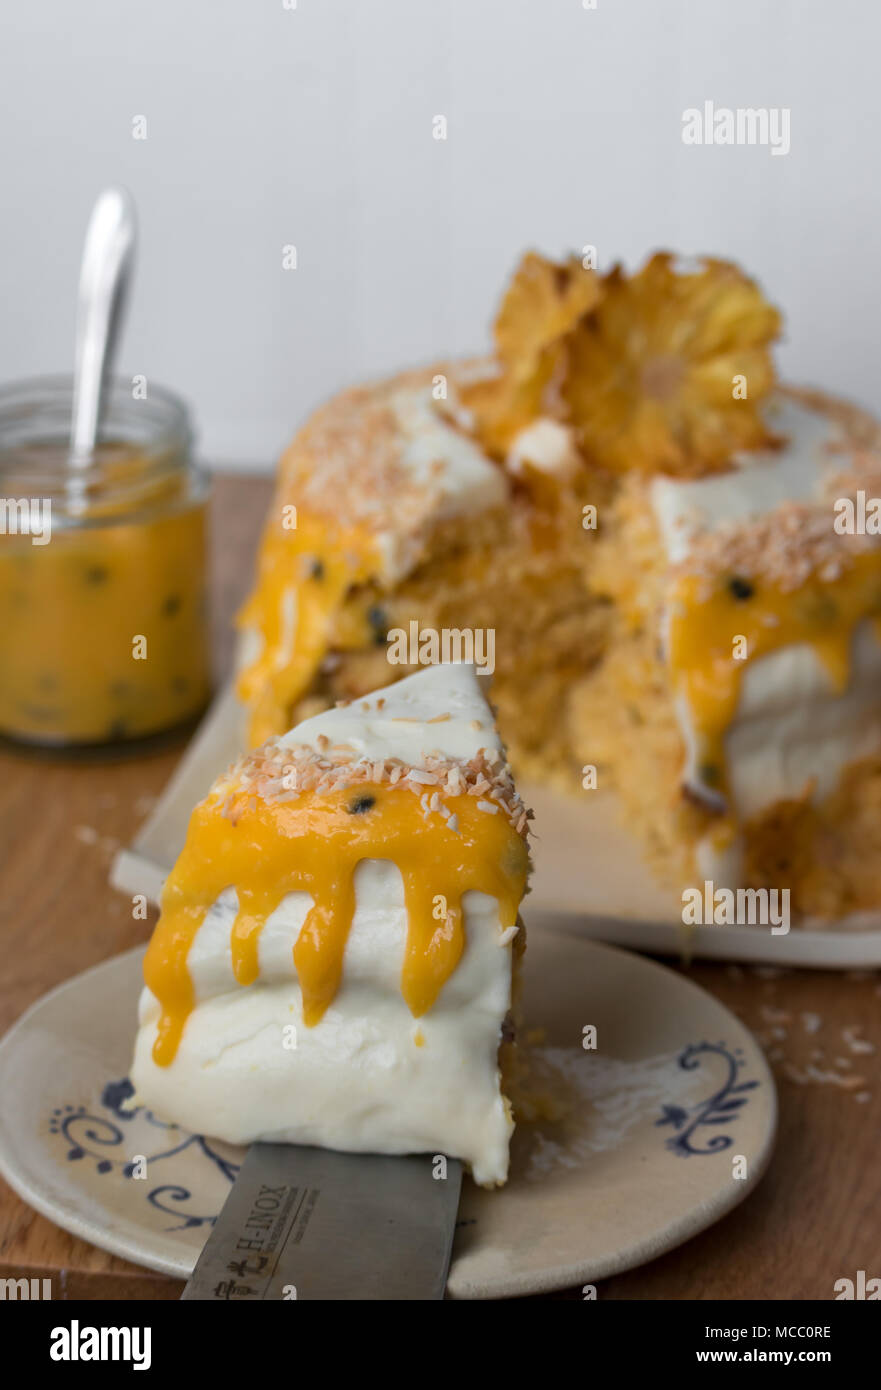 A slice of pineapple coconut layer cake with passion fruit sauce. Served on handmade plate. Stock Photo